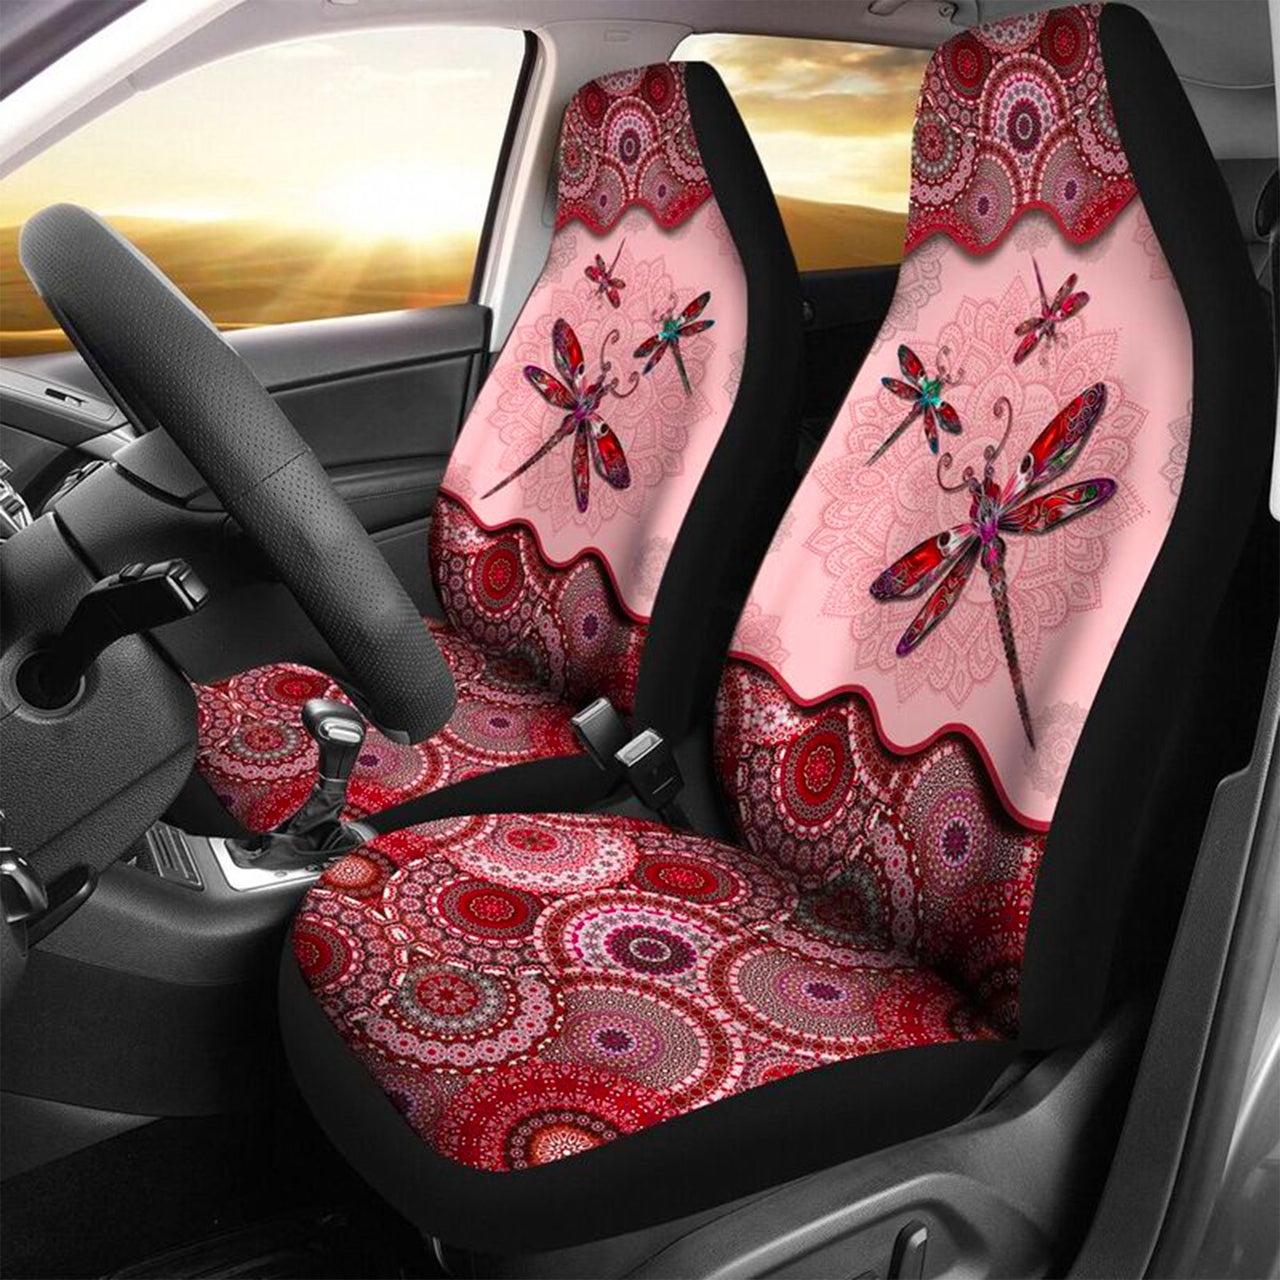 Custom Car Seat Cover Red Dragonfly Bohemian Vintage Mandala Seat Covers for Cars